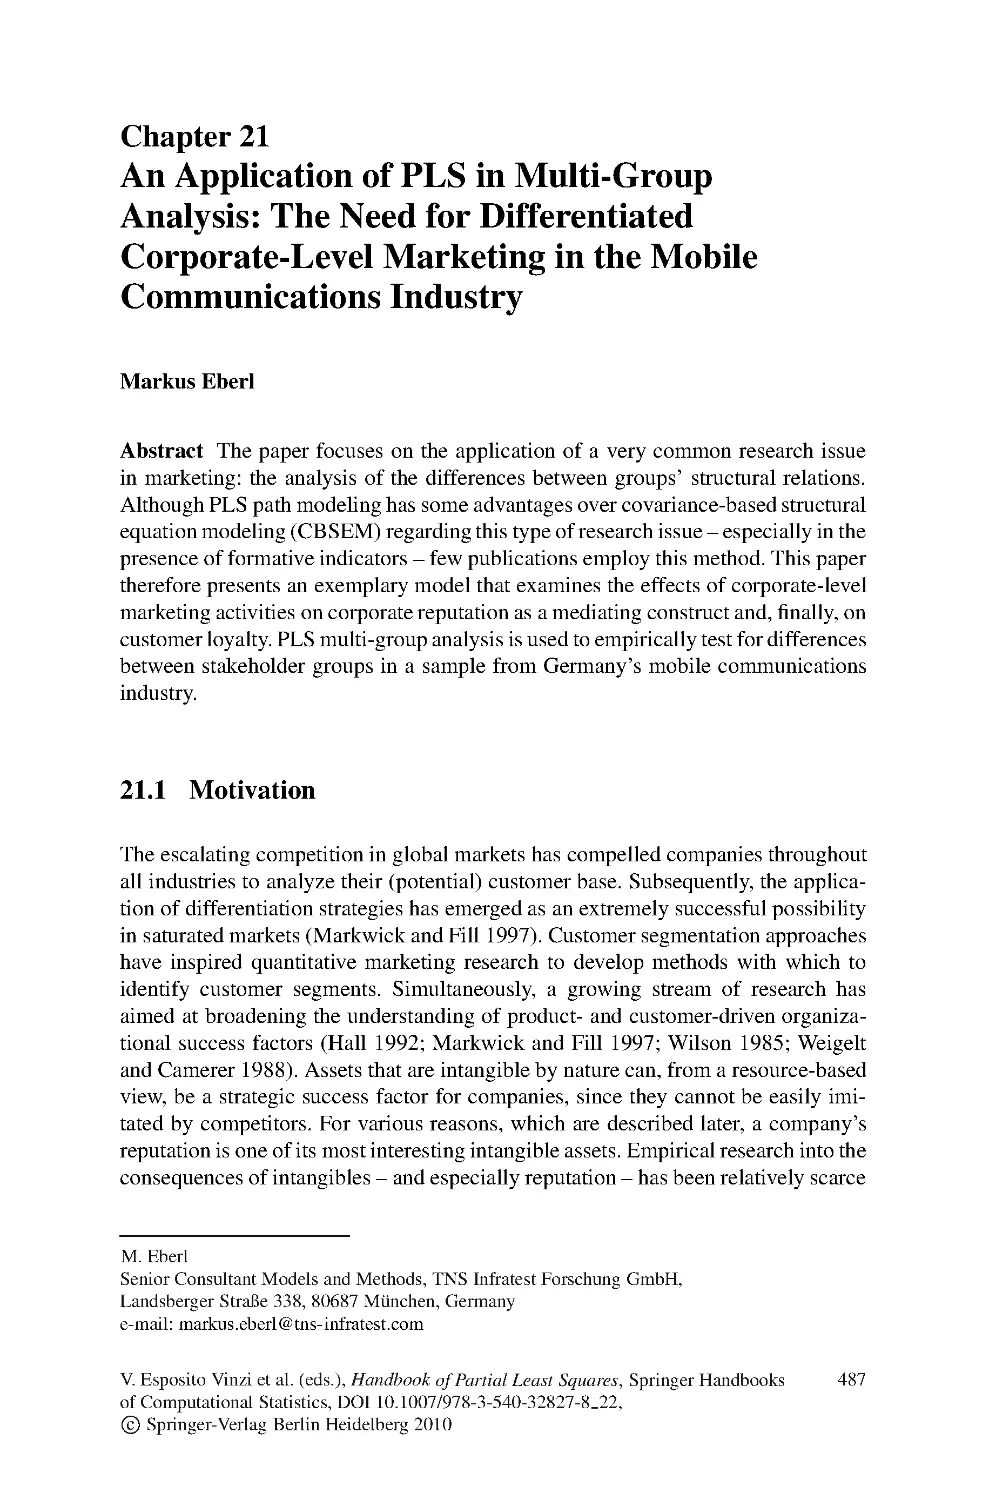 21 An Application of PLS in Multi-Group Analysis: The Need for Differentiated Corporate-Level Marketing in the Mobile Communications Industry